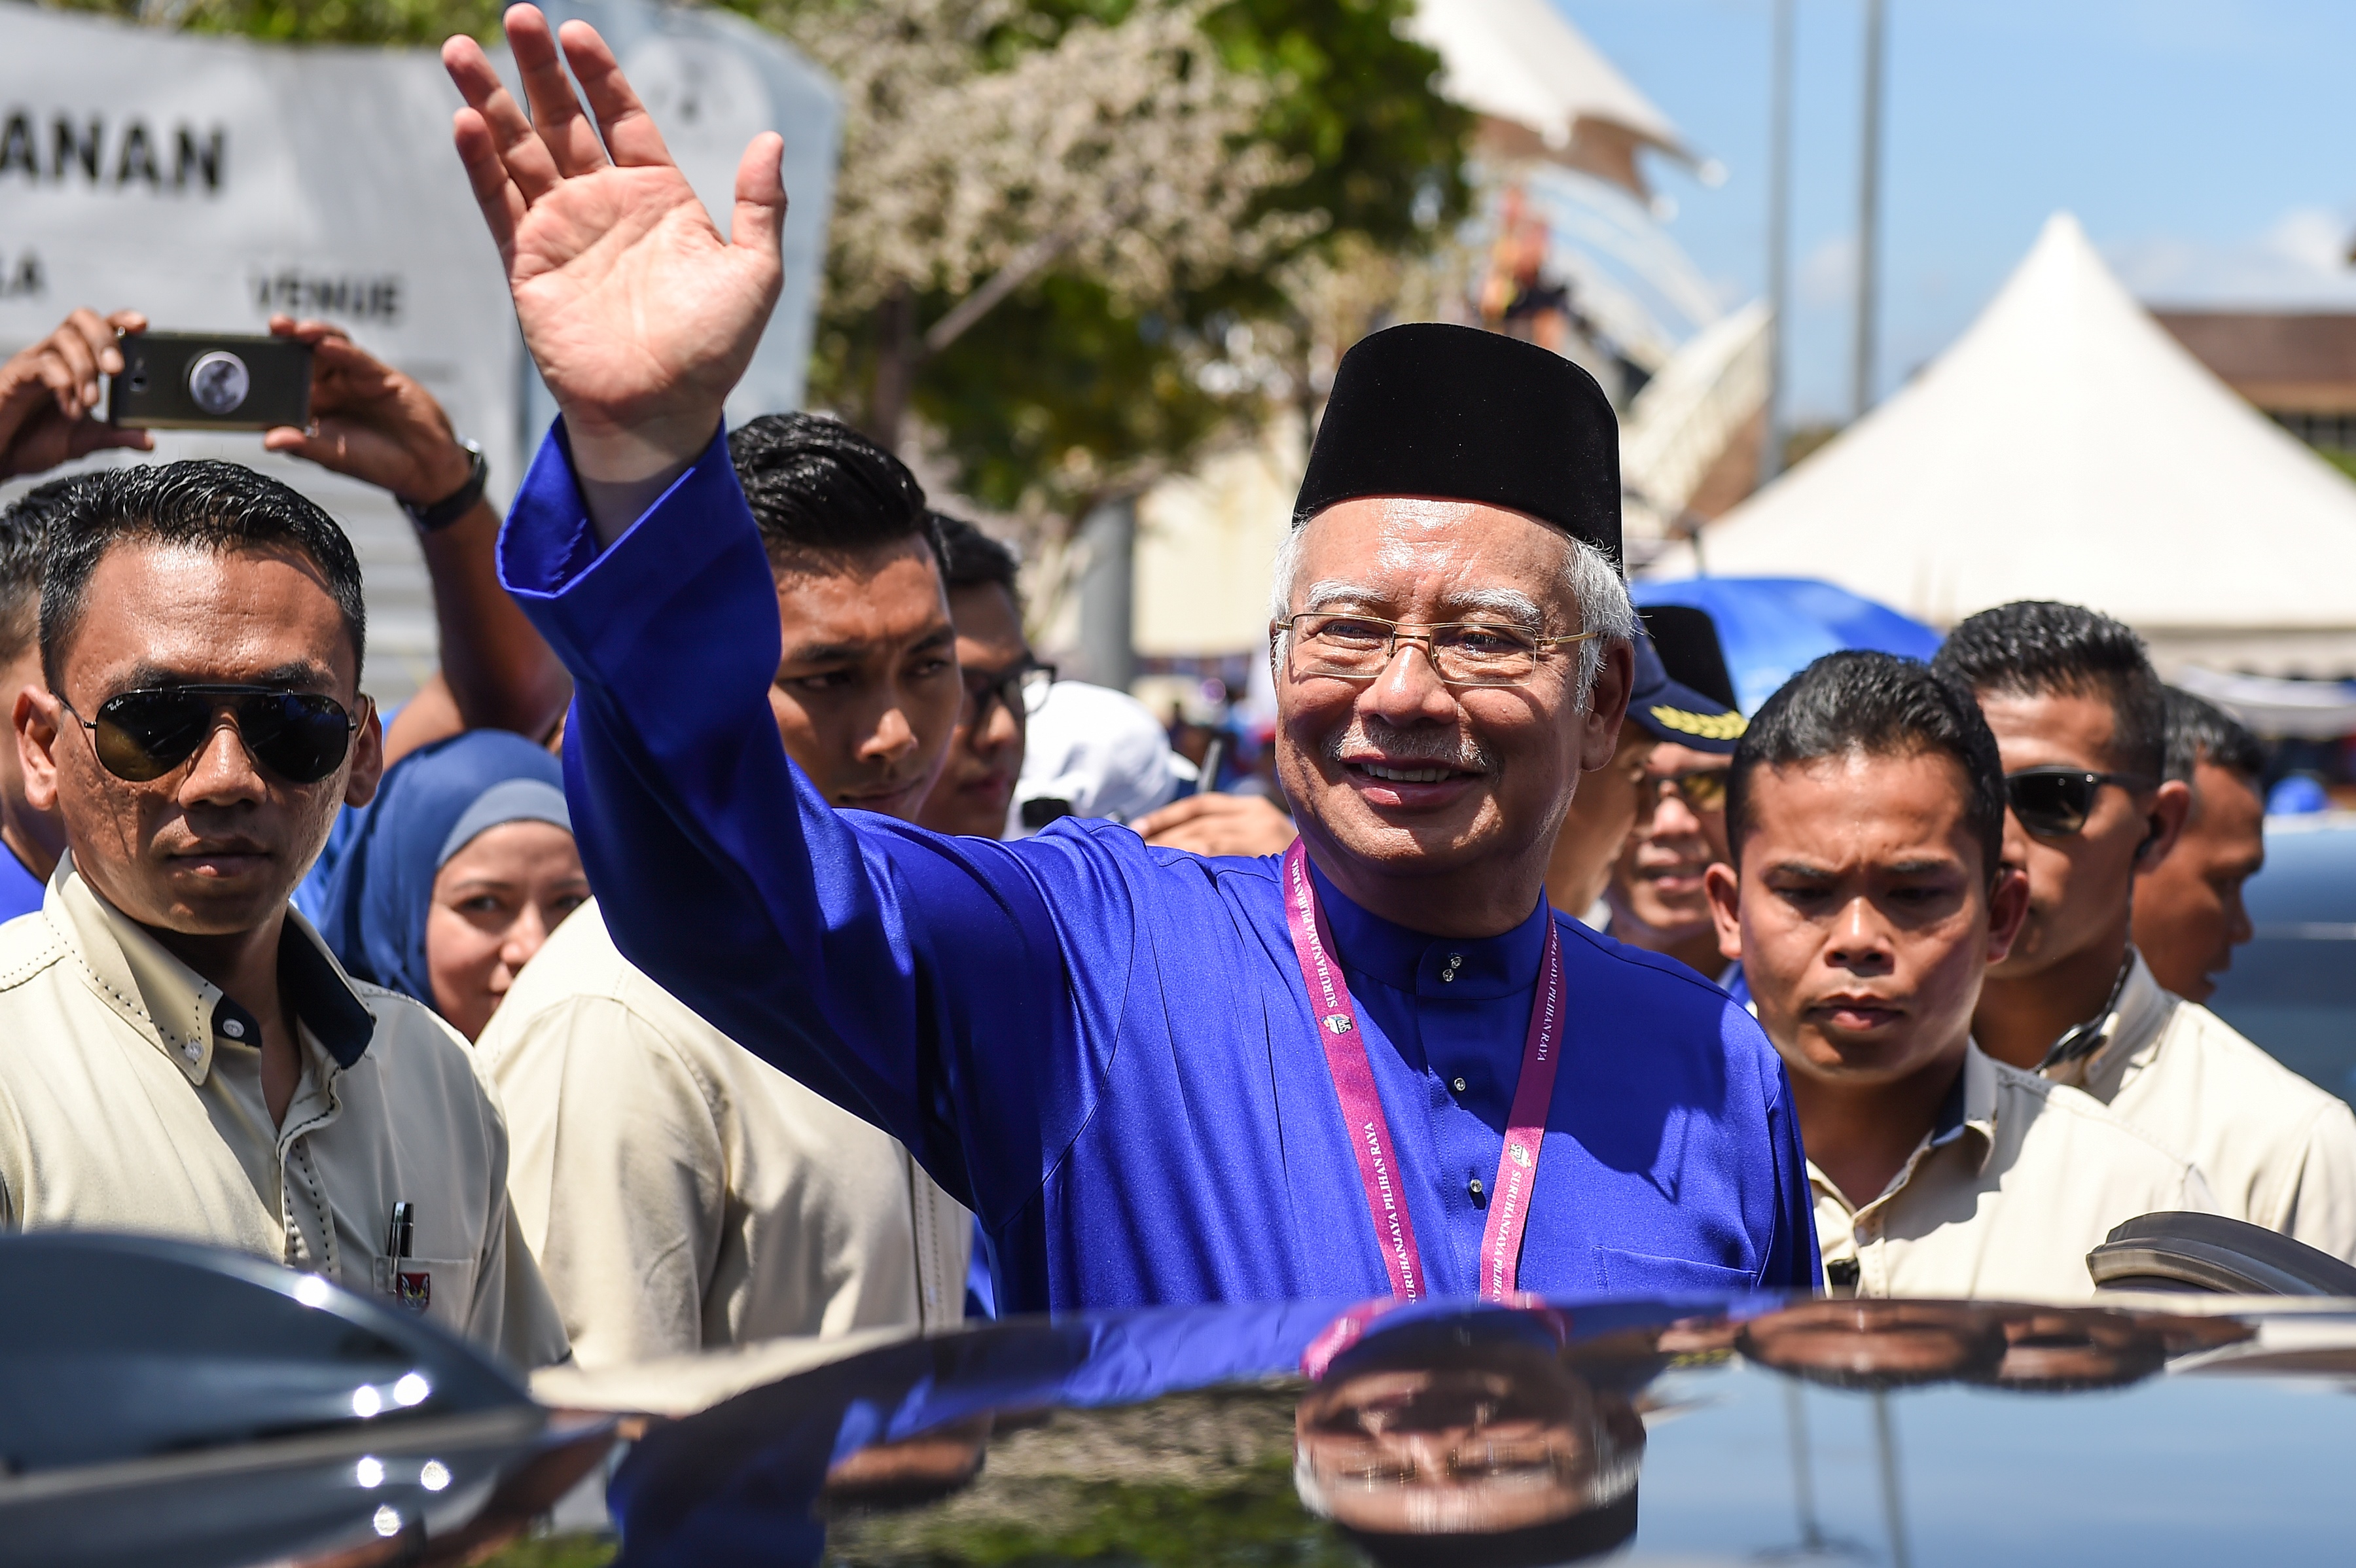 Malaysia's Prime Minister Najib Razak after submitting his documents at the nomination centre in Pekan on April 28, 2018. (Mohd Rasfan—AFP/Getty Images)